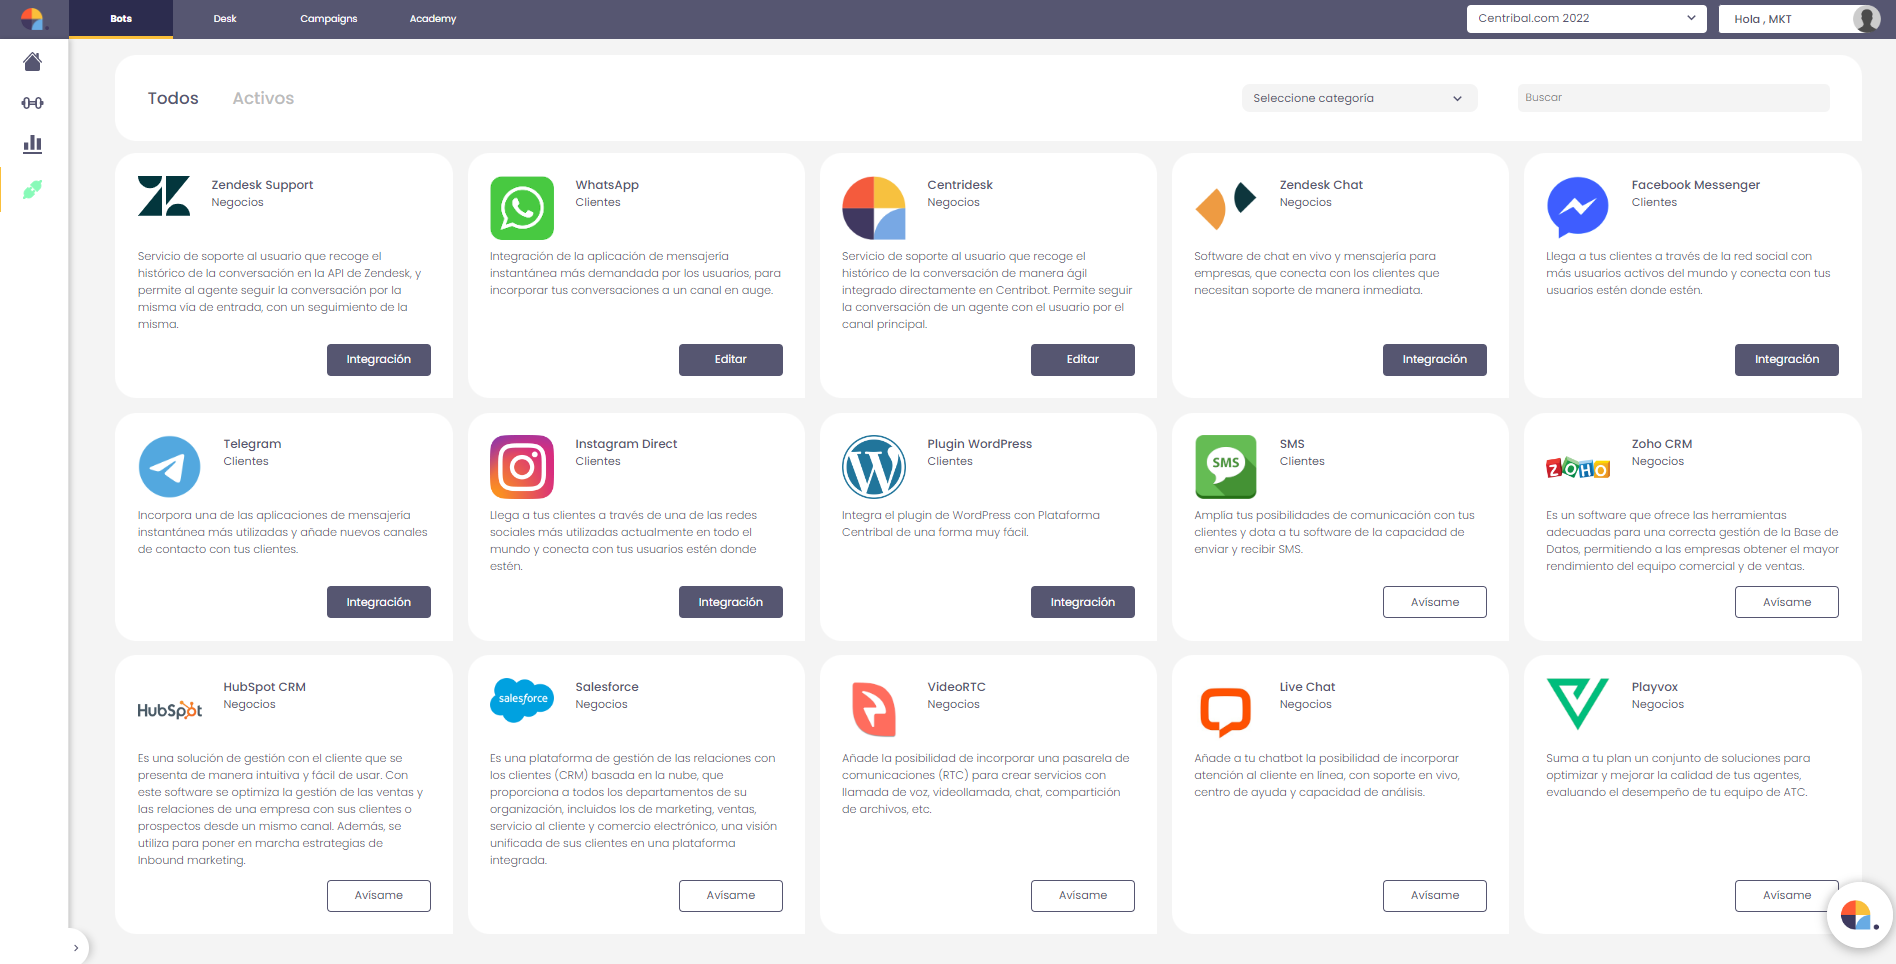 Our integrations marketplace shows which channels the chatbot can connect with. At the moment, there are predefined integrations in business channels such as Centridesk or Zendesk, and also in communication channels such as WhatsApp, Telegram, IG & FB